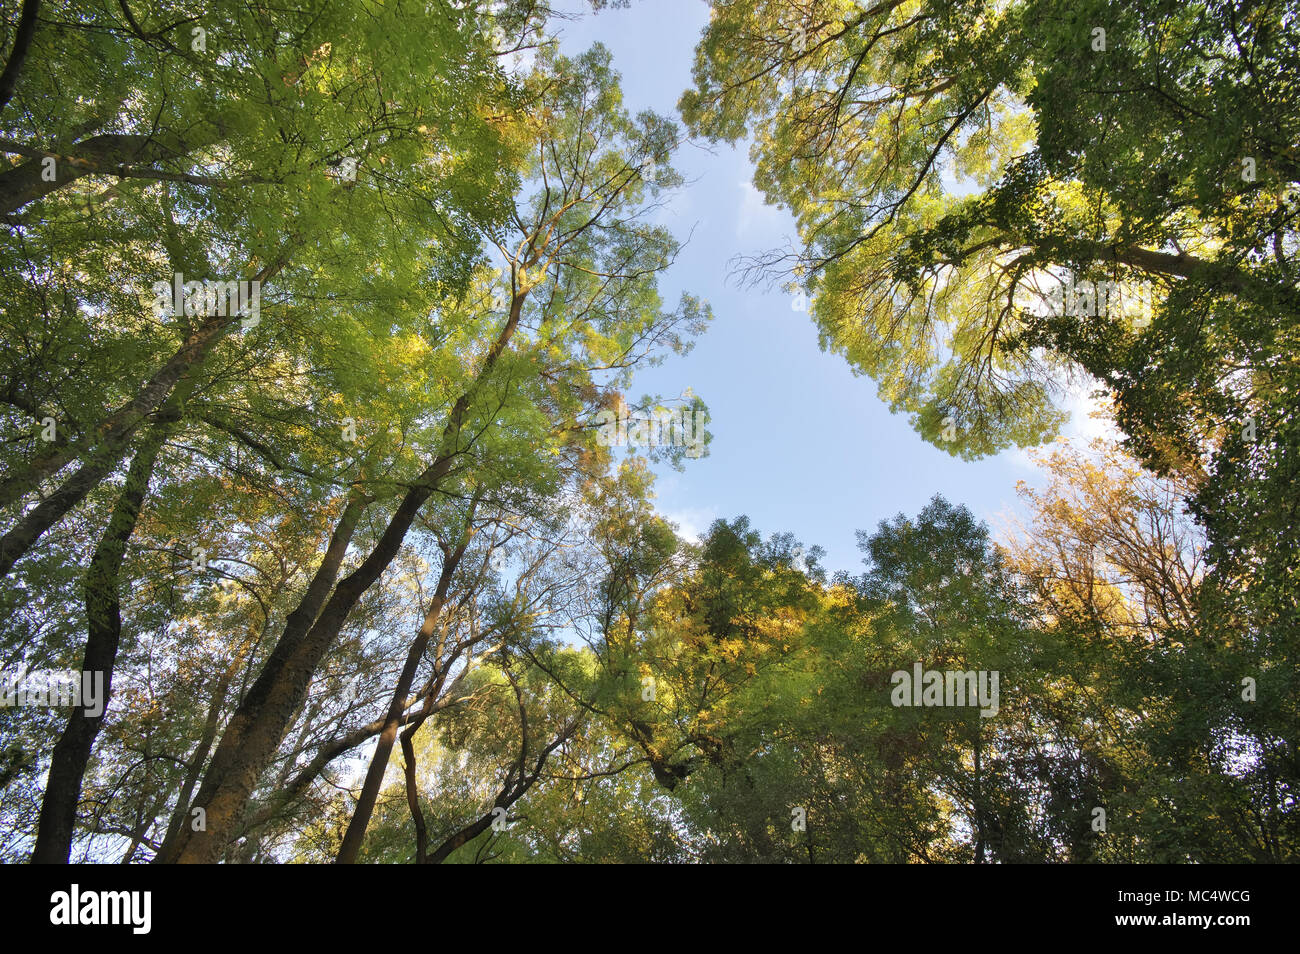 Into the forest. Nature composition. Stock Photo